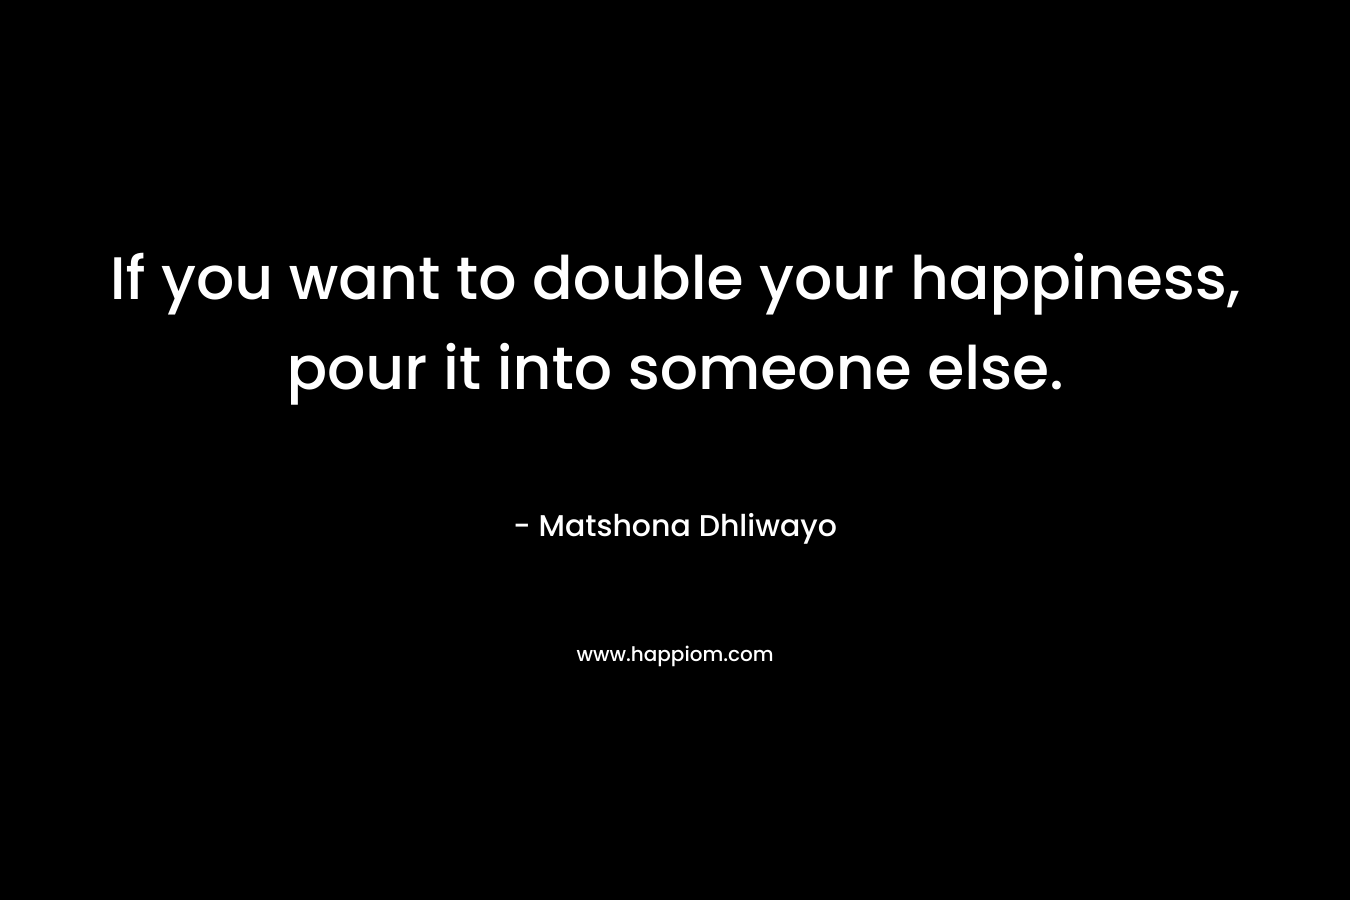 If you want to double your happiness, pour it into someone else.